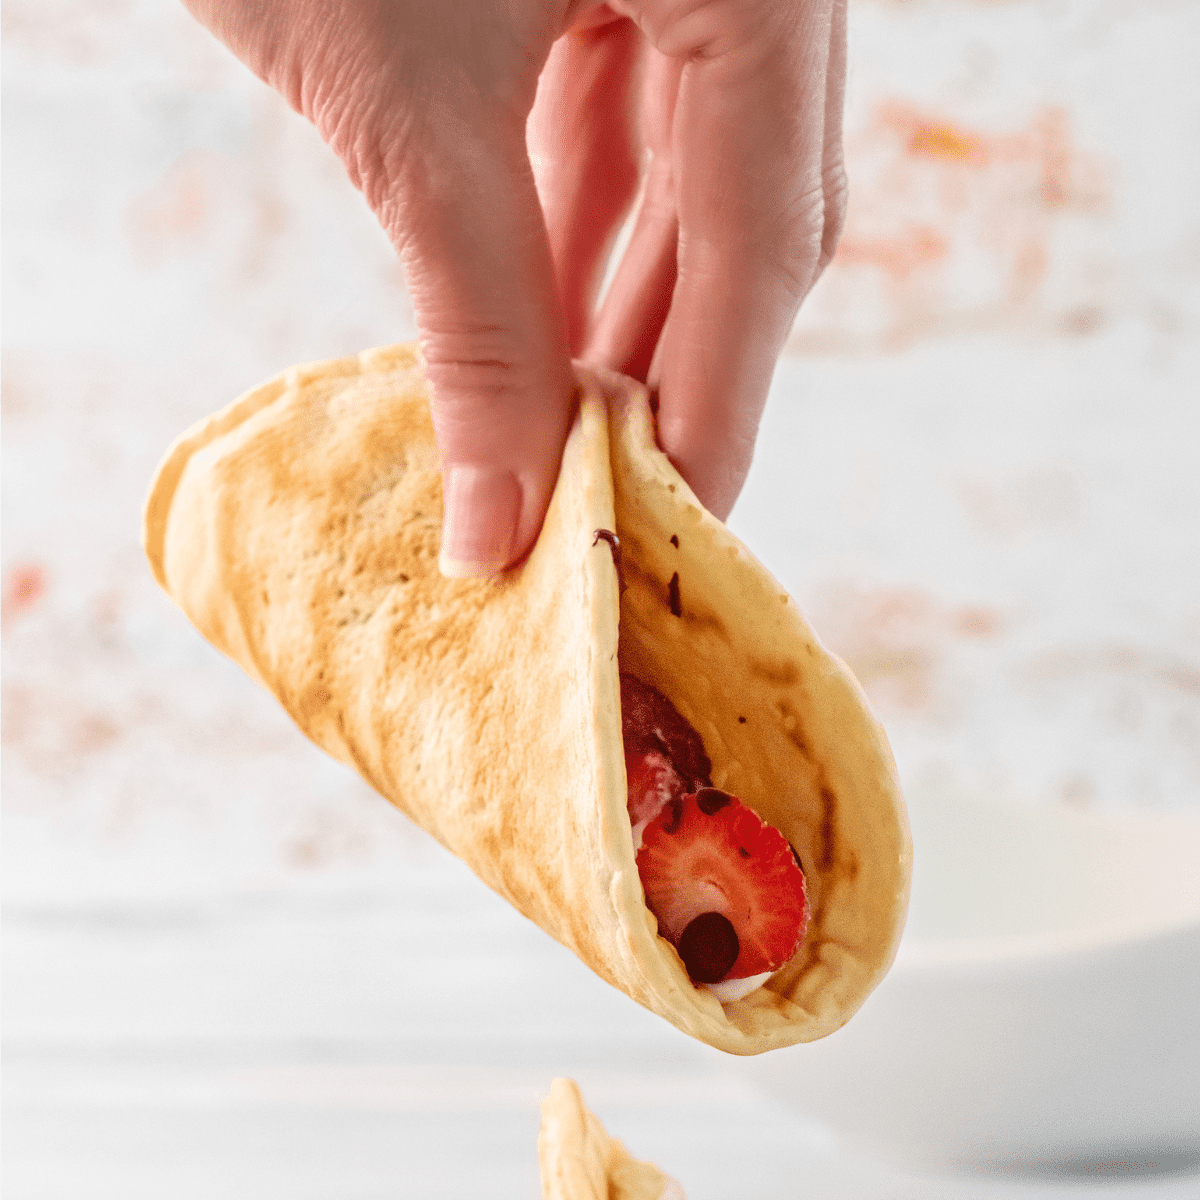 one pancake taco being held in a hand